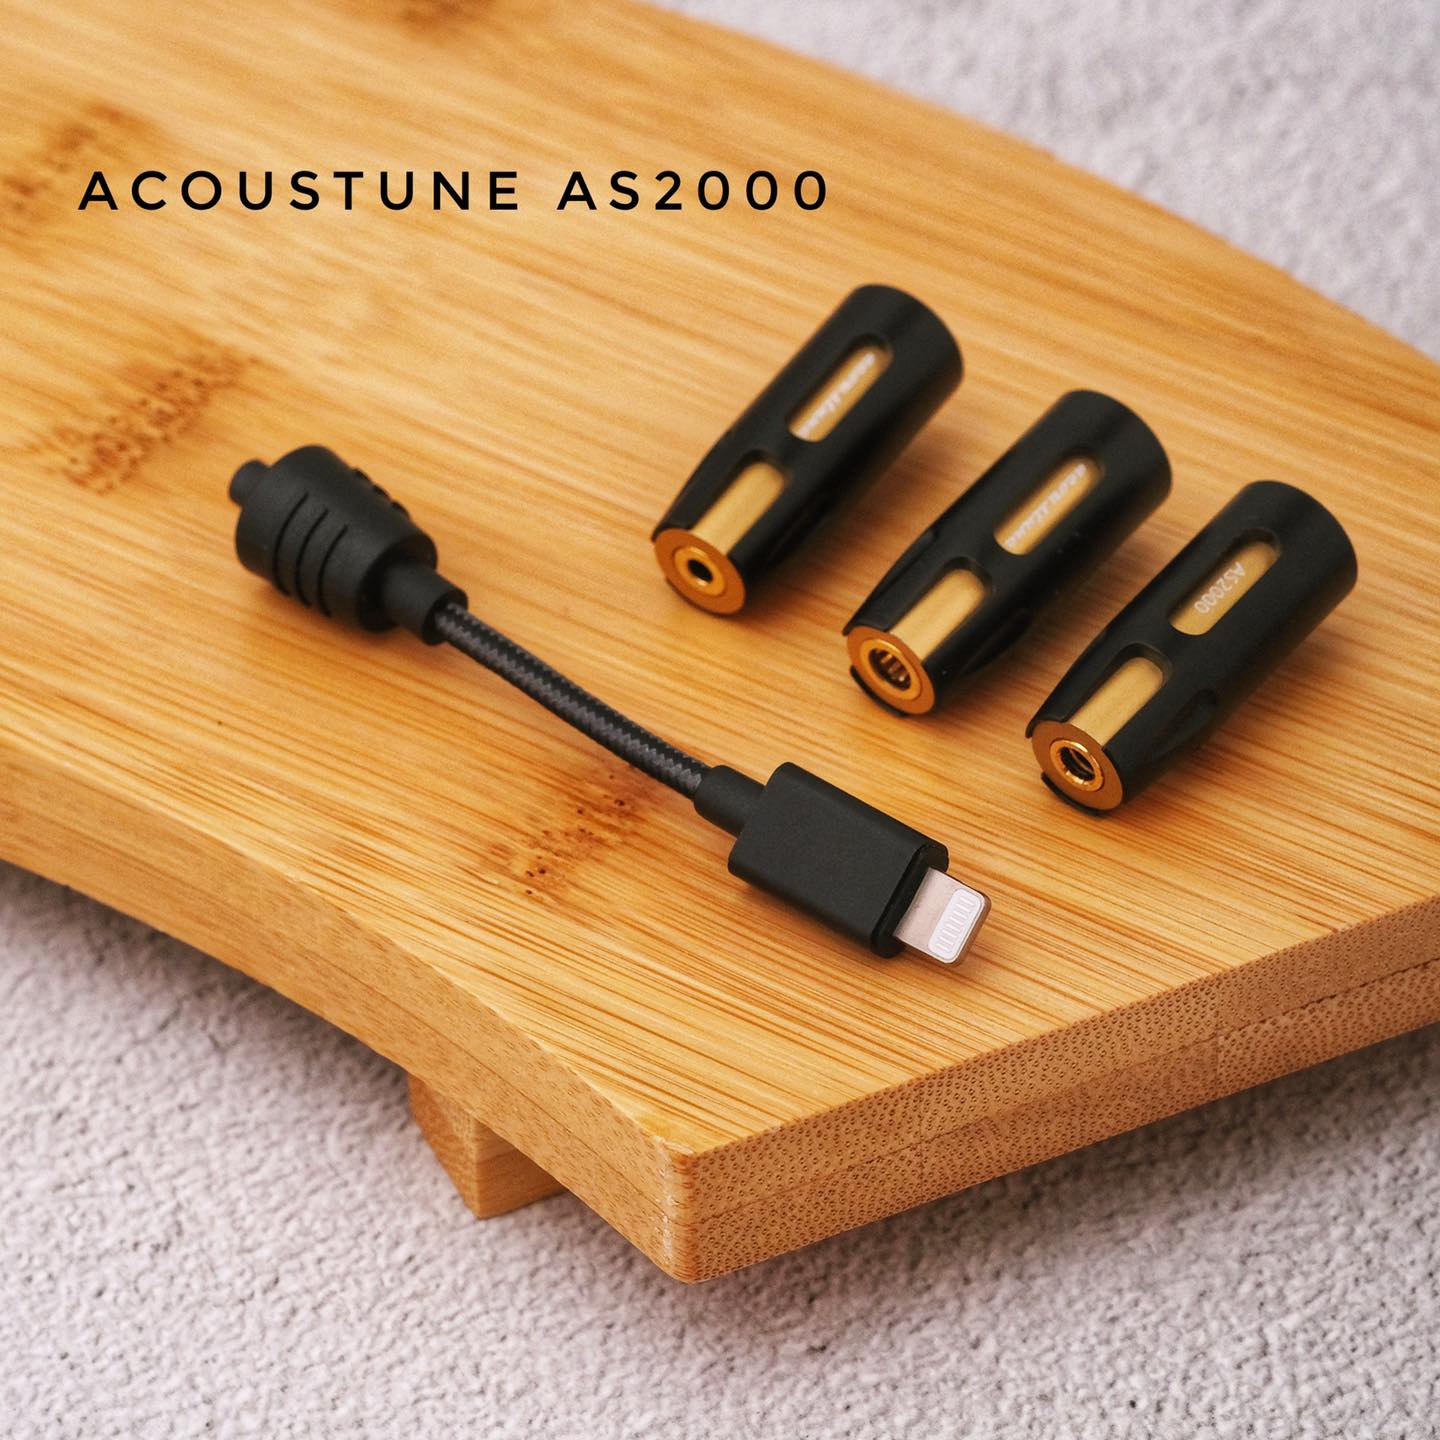 Acoustune AS2000 Lightning Adapter to 3.5mm 2.5mm 4.4mm Headphone for Apple iPhone